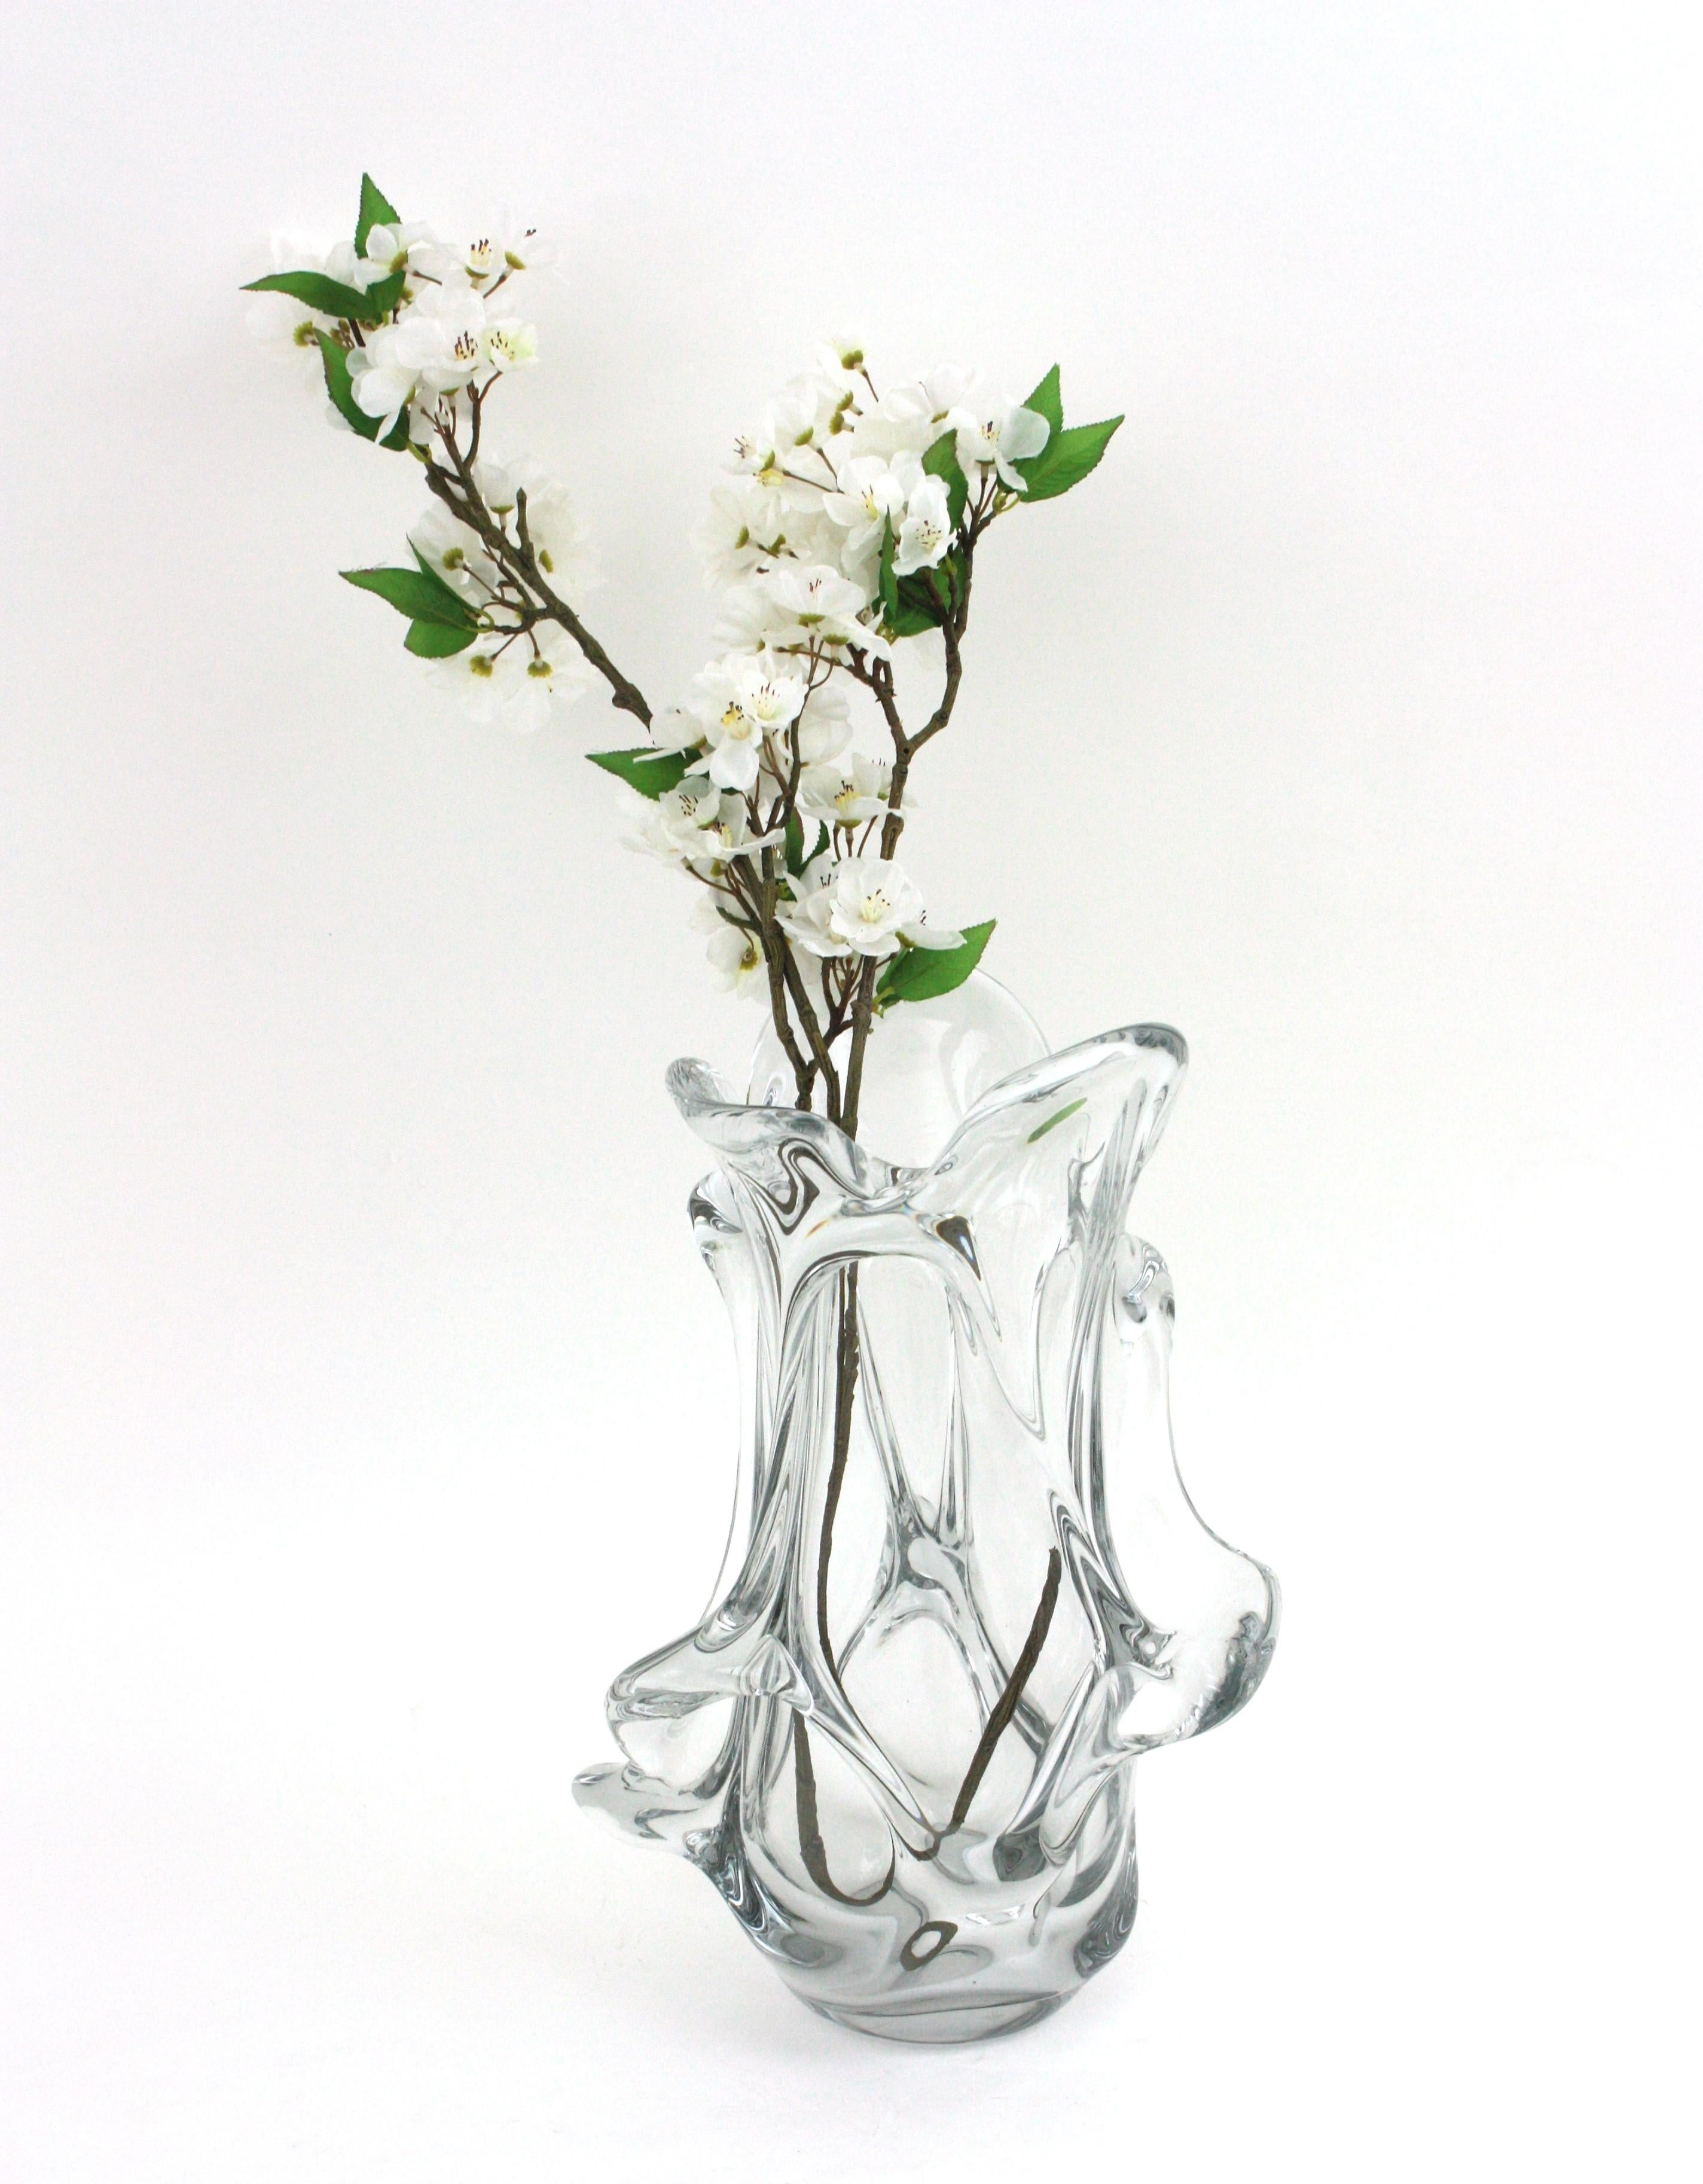 Large Murano Organic Shaped Vase in Clear Glass, 1950s For Sale 11